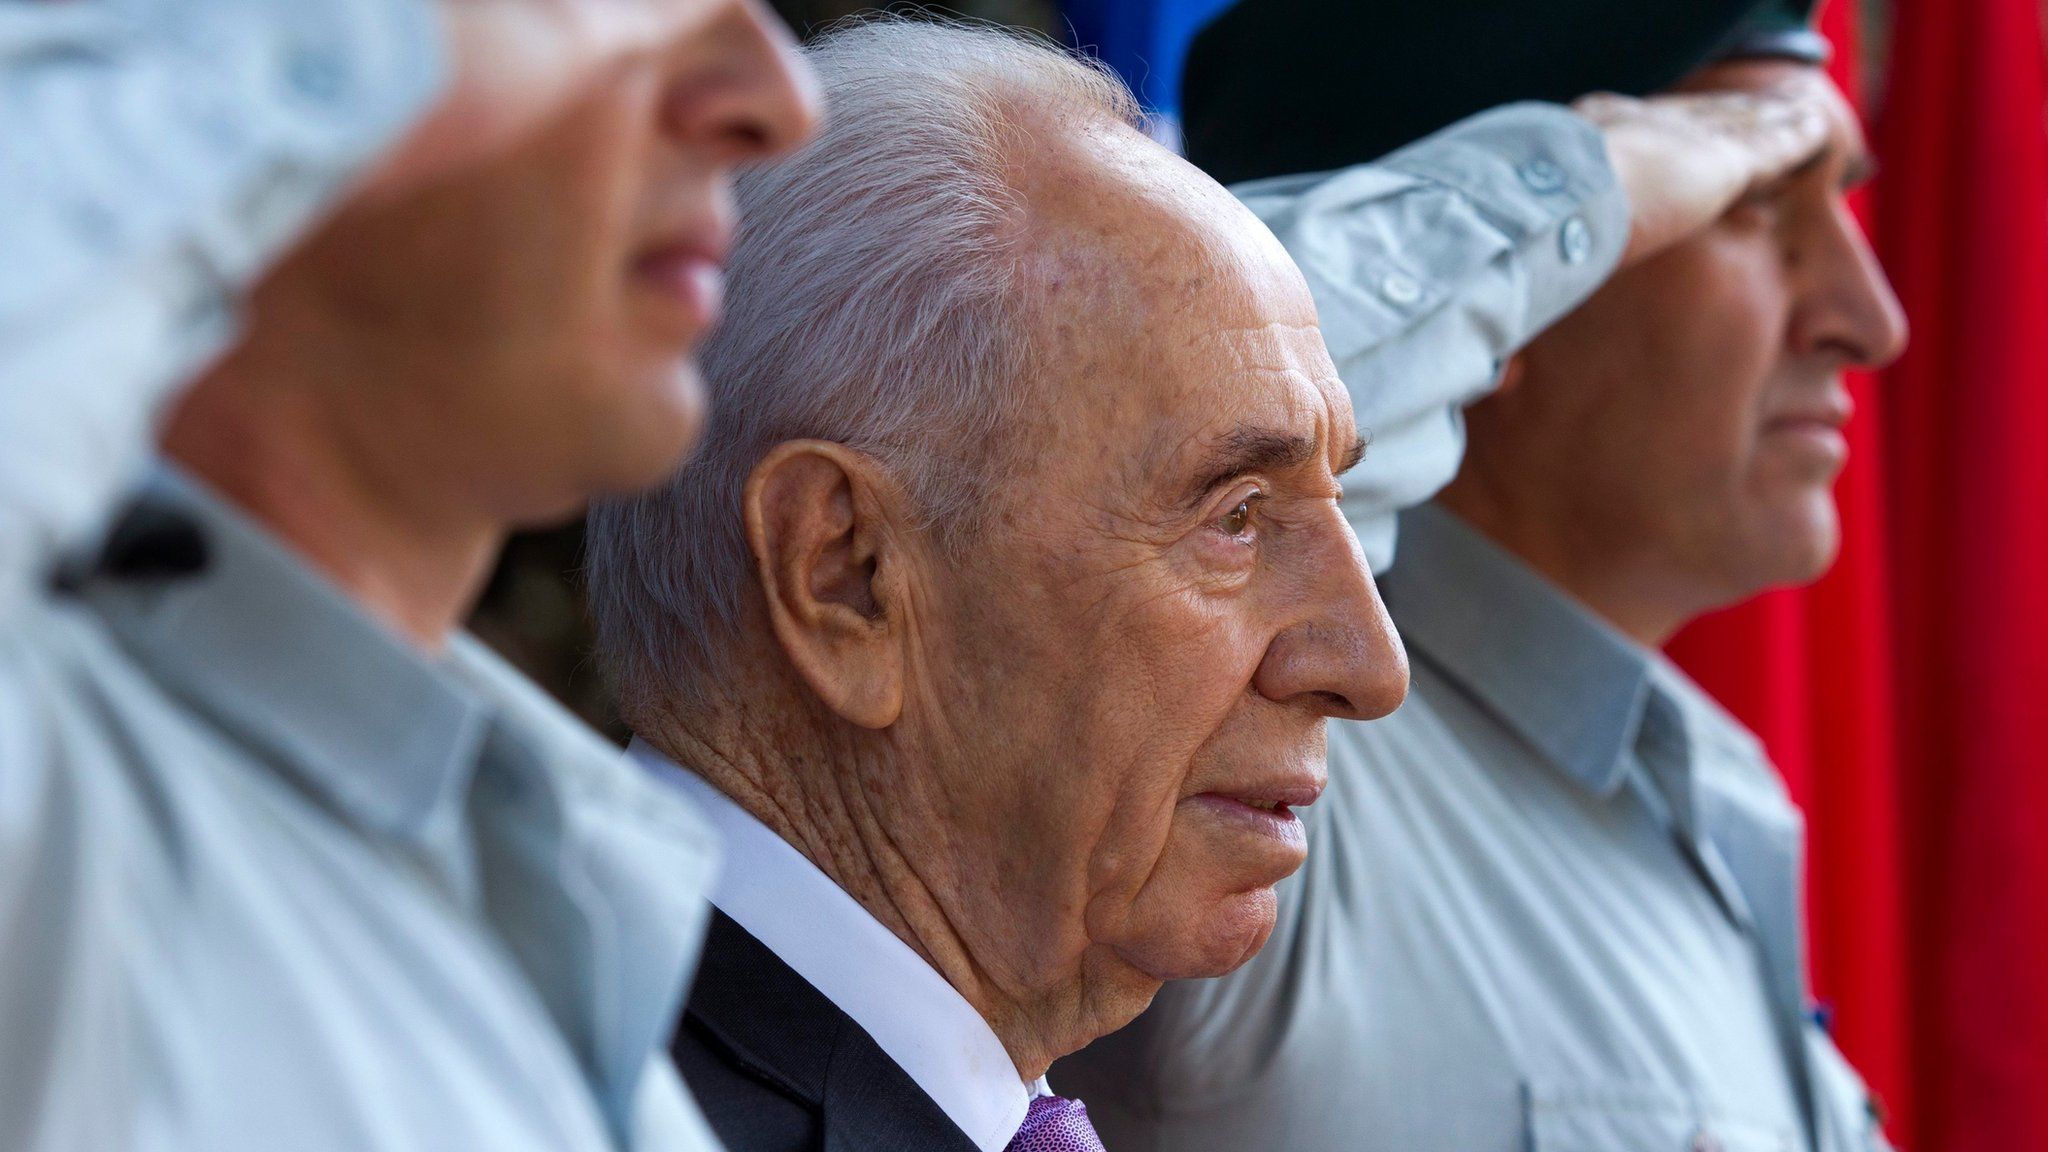 Shimon Peres, flanked by saluting Israeli soldiers, during a ceremony at the president's residence in Jerusalem (17 February 2014)